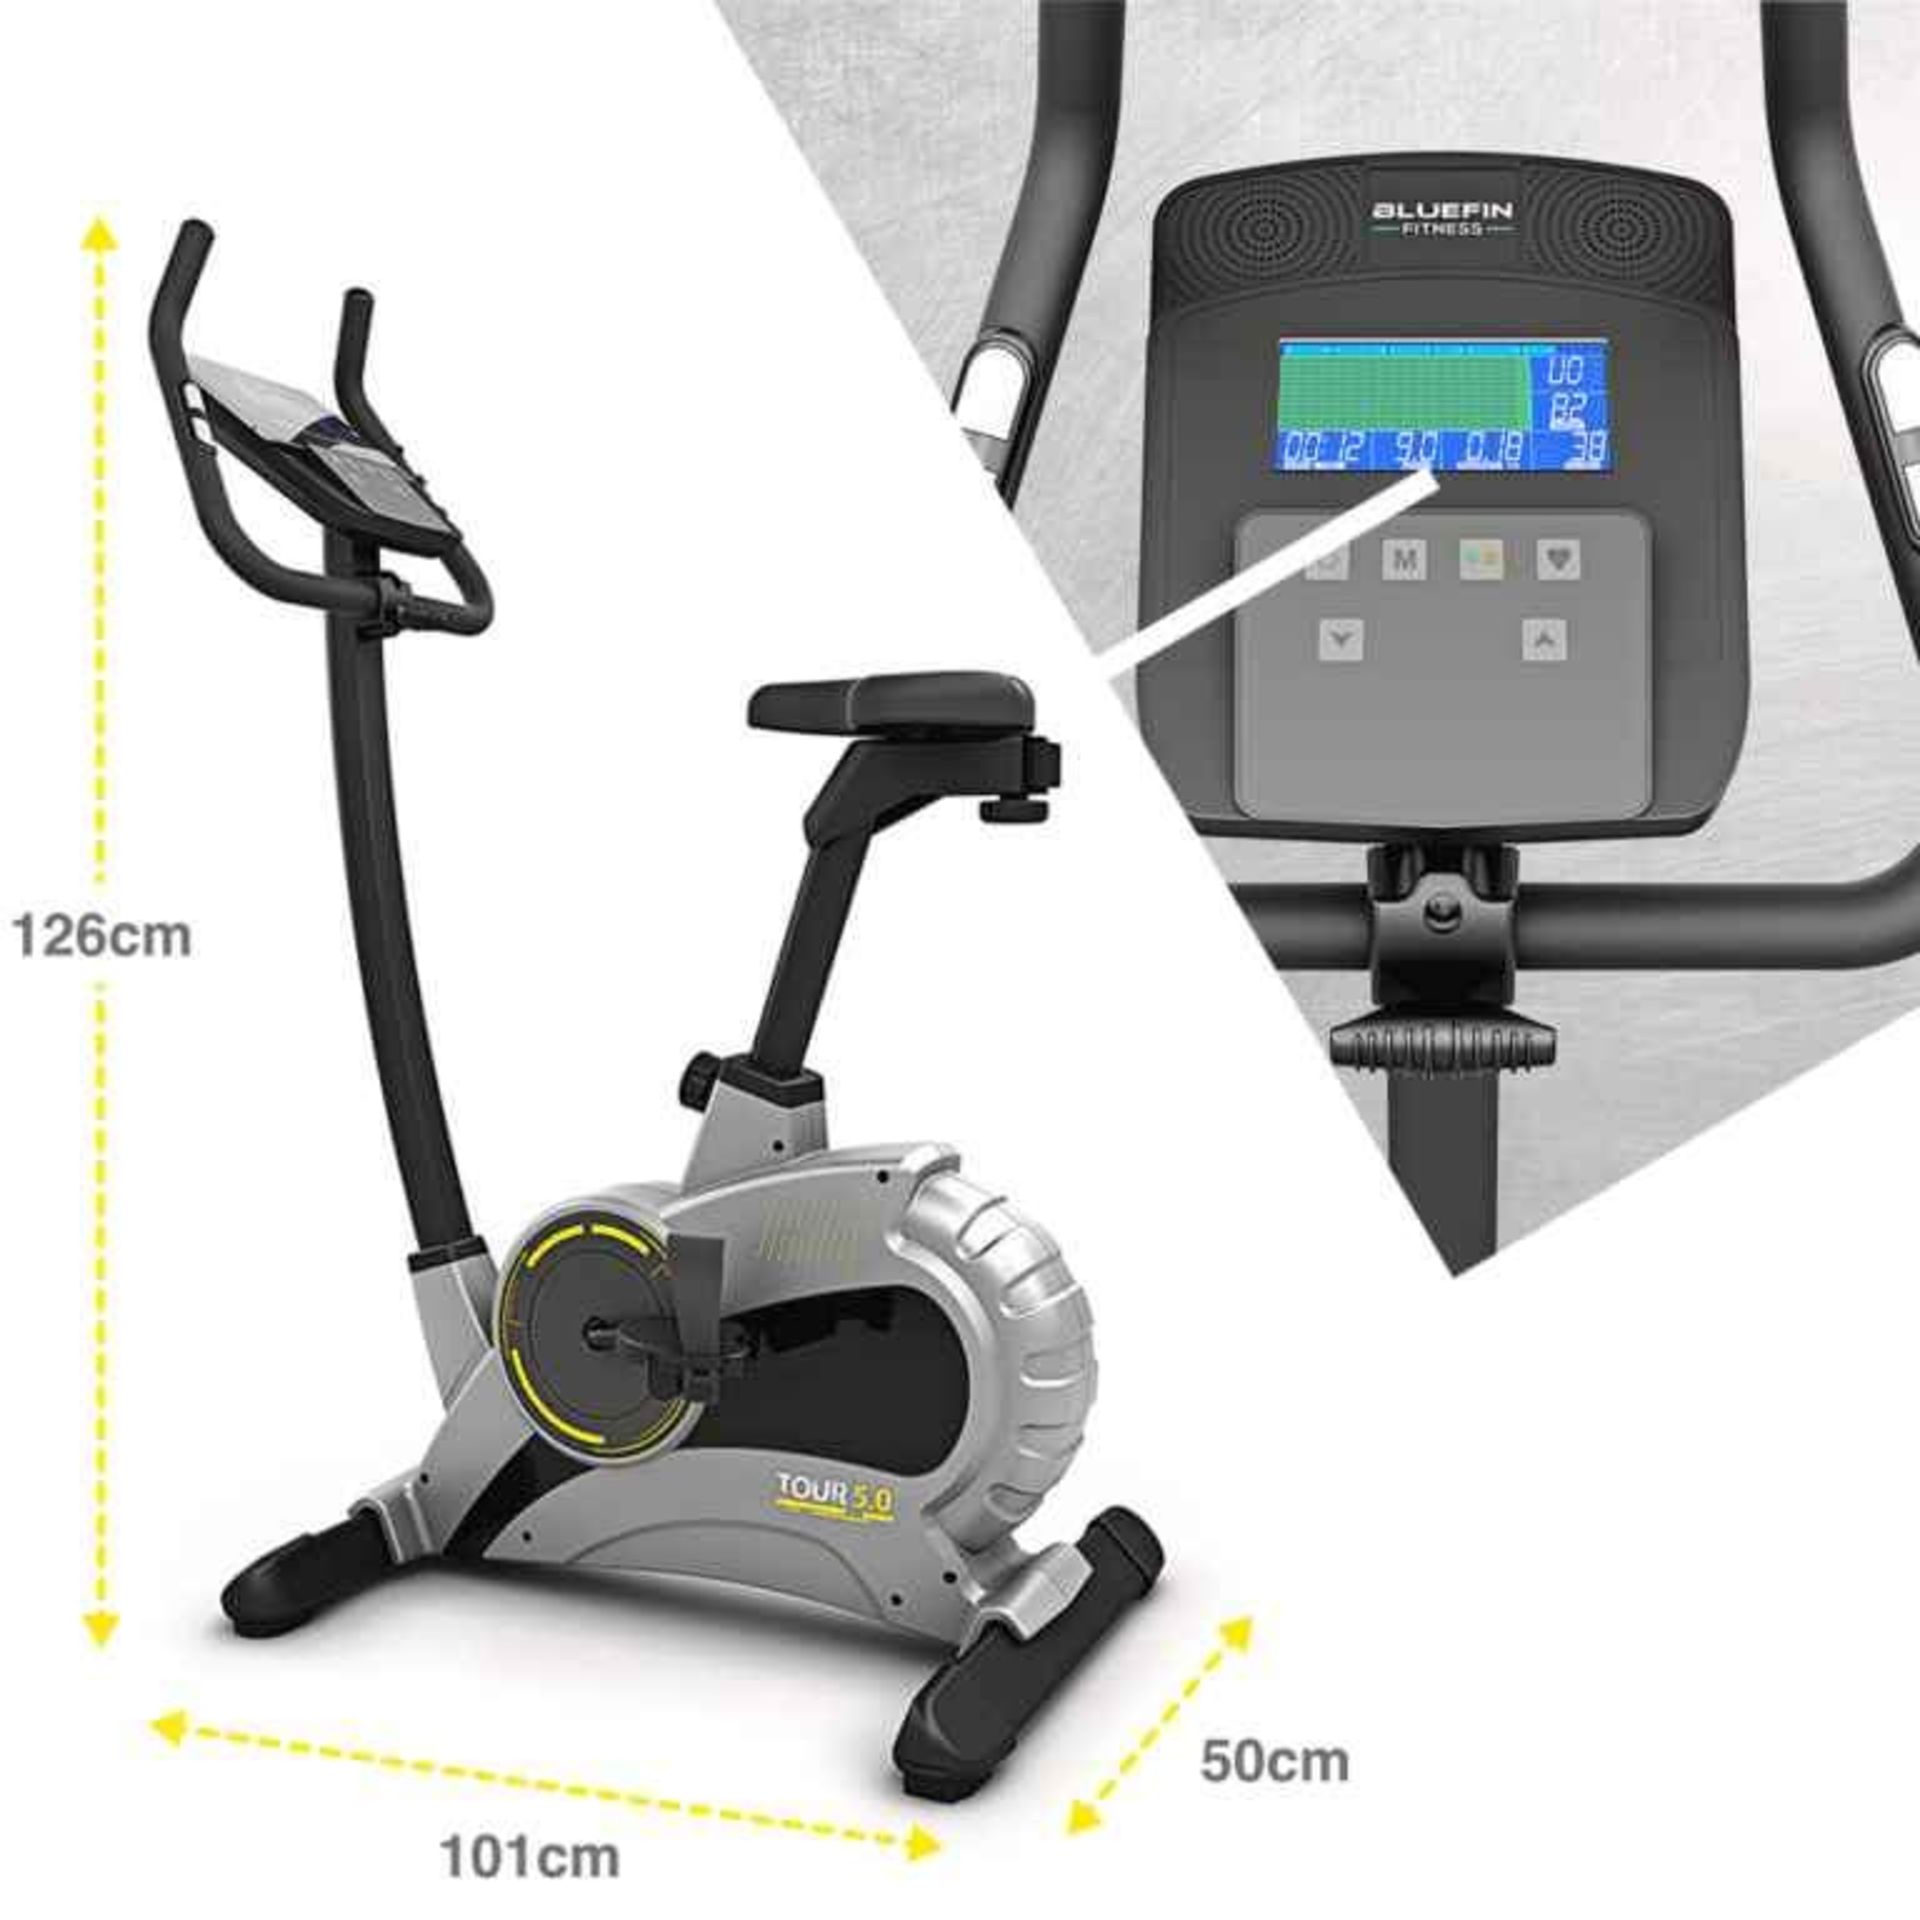 BLUEFIN FITNESS TOUR 5.0 RESISTANCE EXERCISE BIKE RRP £349.00 - Image 3 of 7